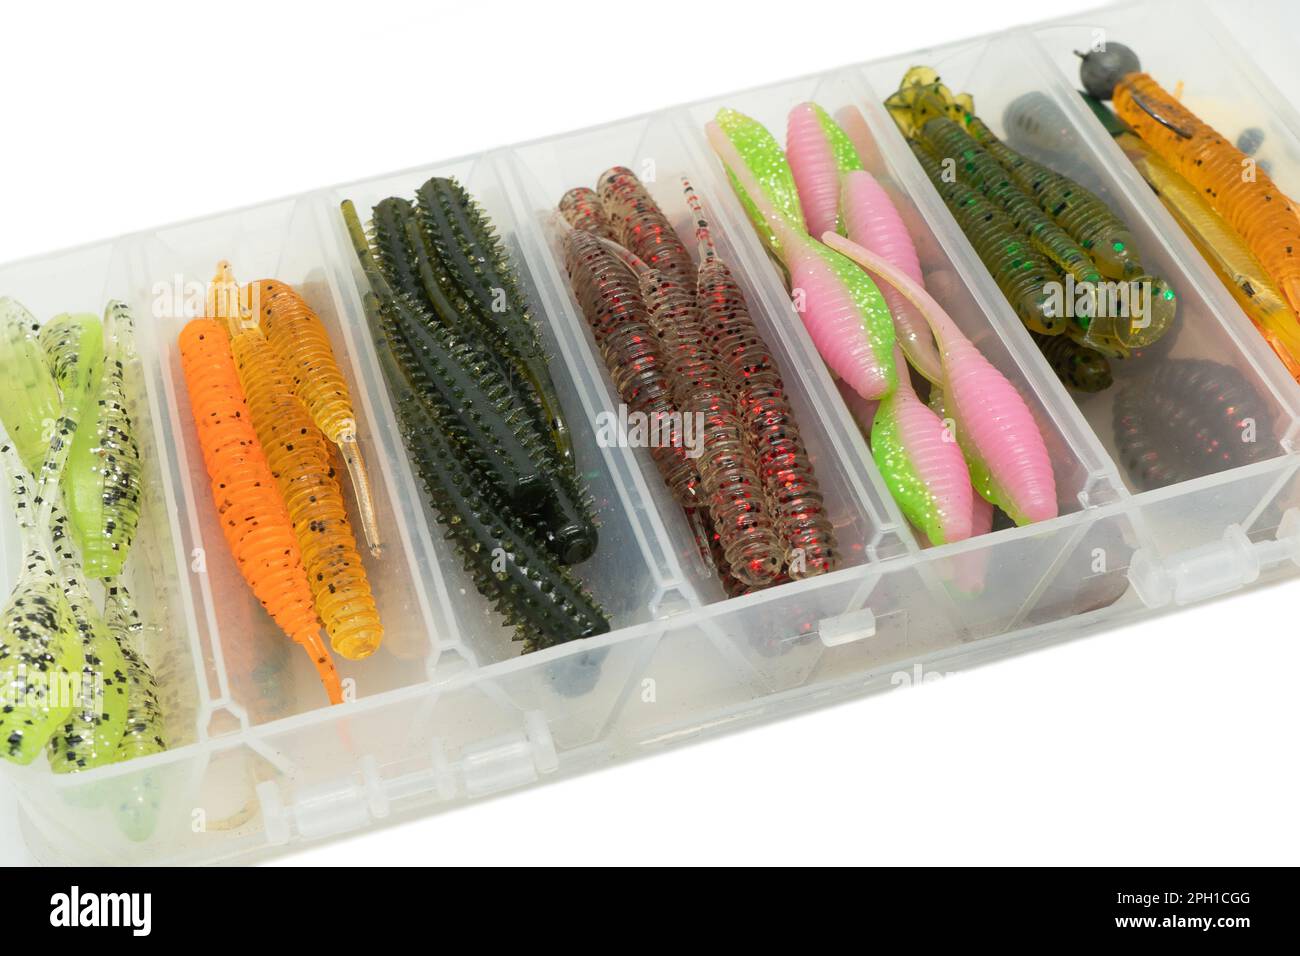 Set of Isolated Artificial Fishing Lures and Rubber Worms Stock Photo